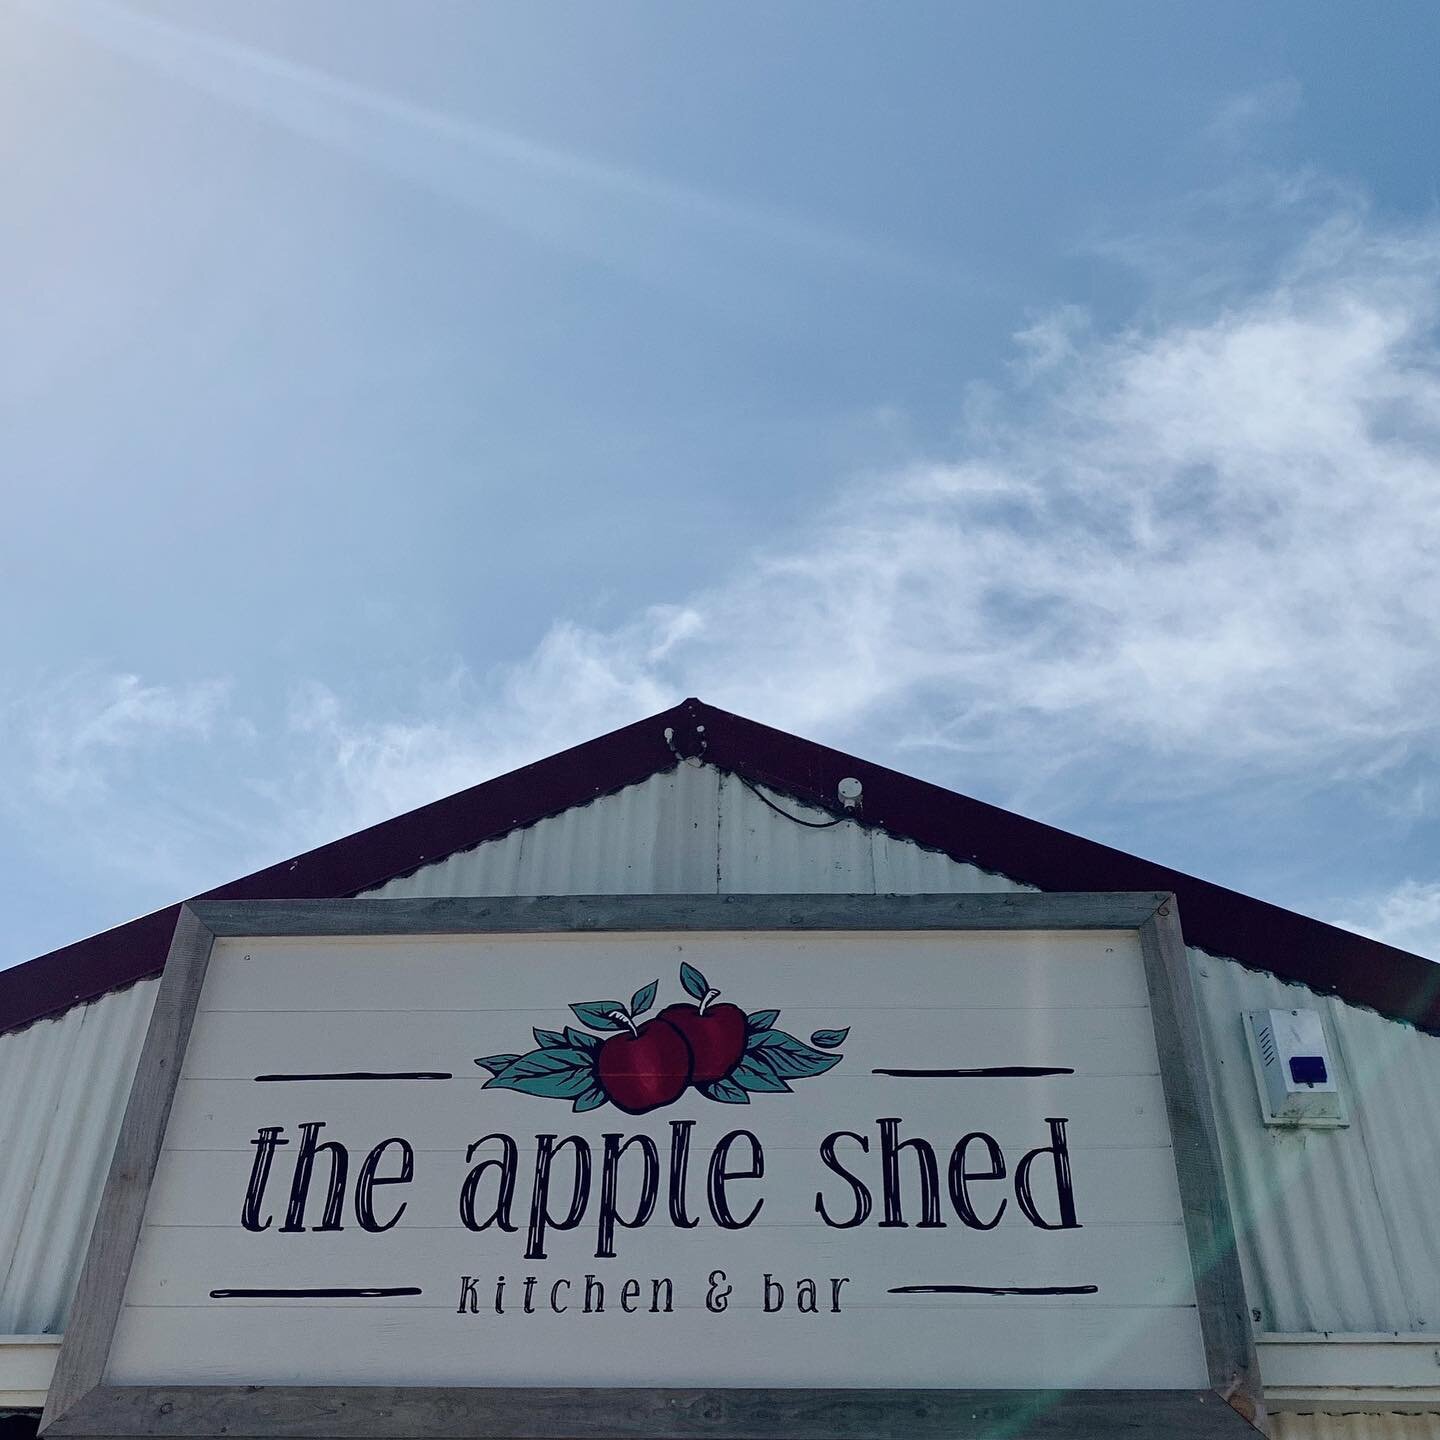 Happy Waitangi Day🇳🇿 

Make the most of this beautiful weather and join us out in Māpua! We will be open all long weekend from 10am - late, no surcharge. 

#theappleshedmapua #mapuawharf #mapua #nelson #nelsontasman #nelsonregion #ilovenelsontasman